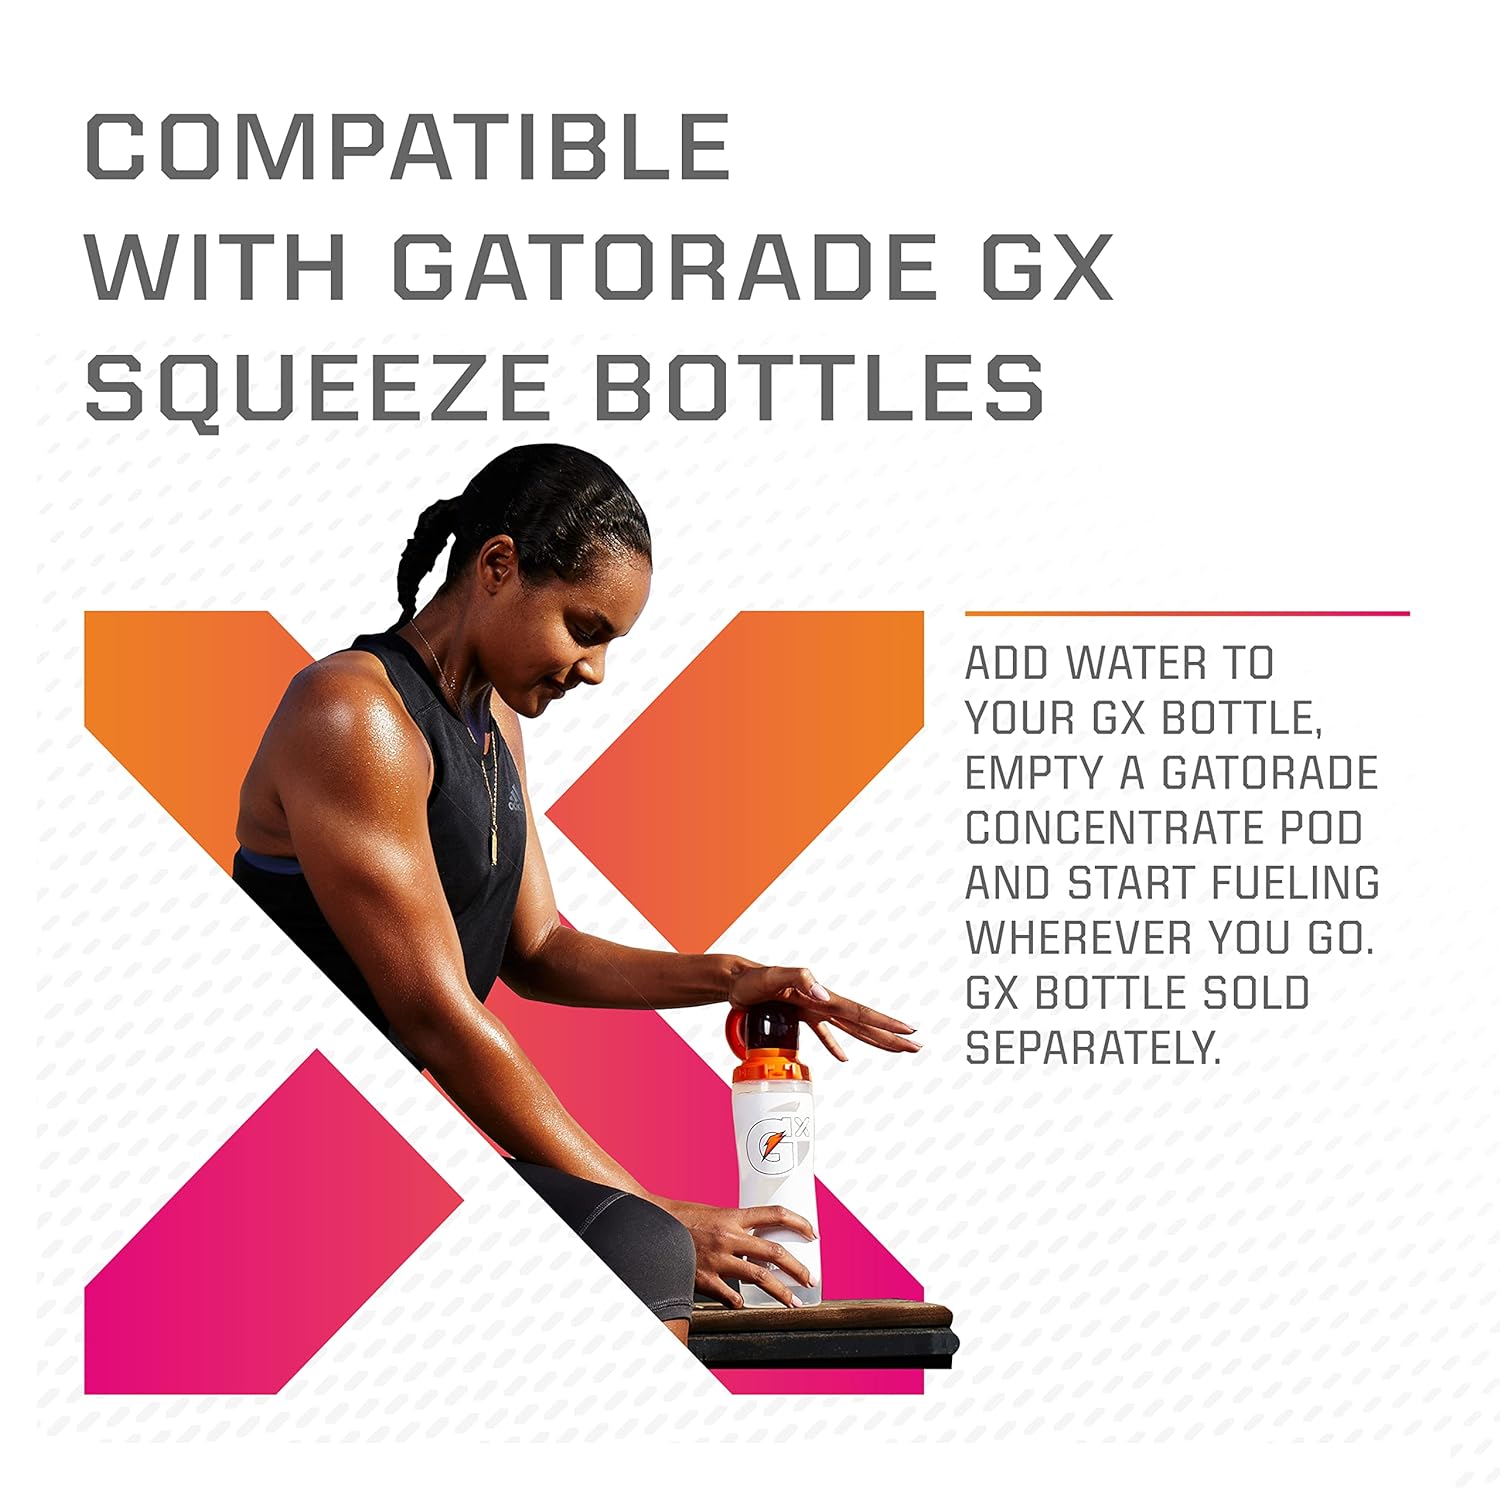 Gatorade Gx Hydration System, Non-Slip Gx Squeeze Bottles Or Gx Sports Drink Concentrate Pods : Grocery & Gourmet Food